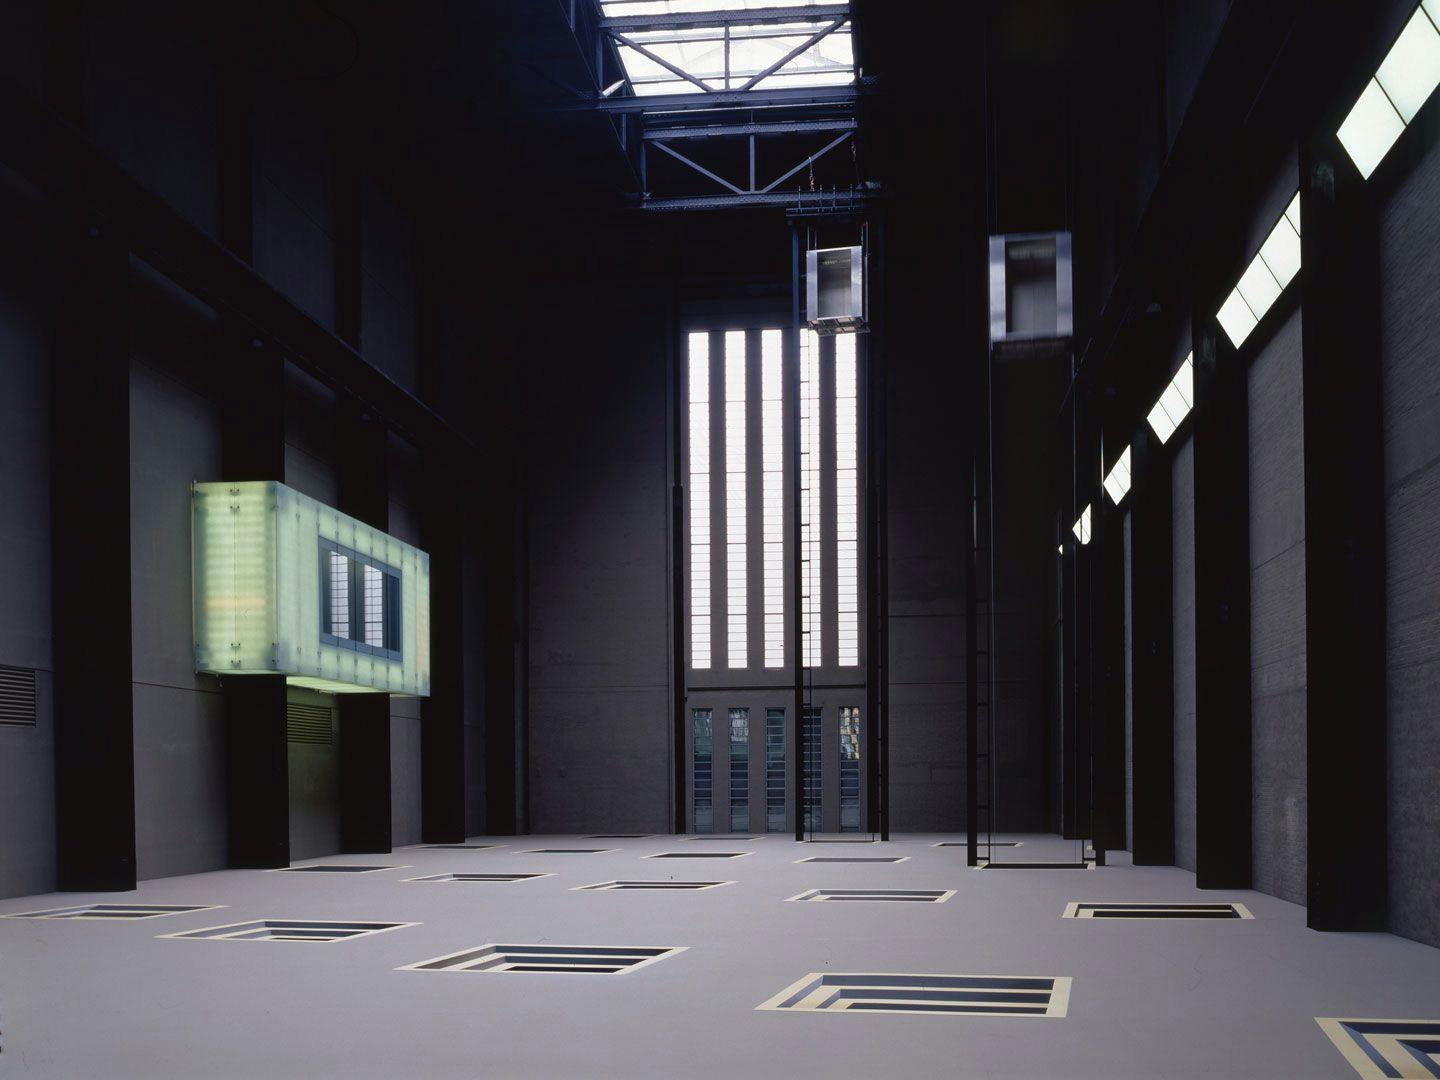 A mixed media sculptural installation by Juan Muñoz, titled Double Bind, dated 2001, at Tate Modern, in London, England, in 2001.